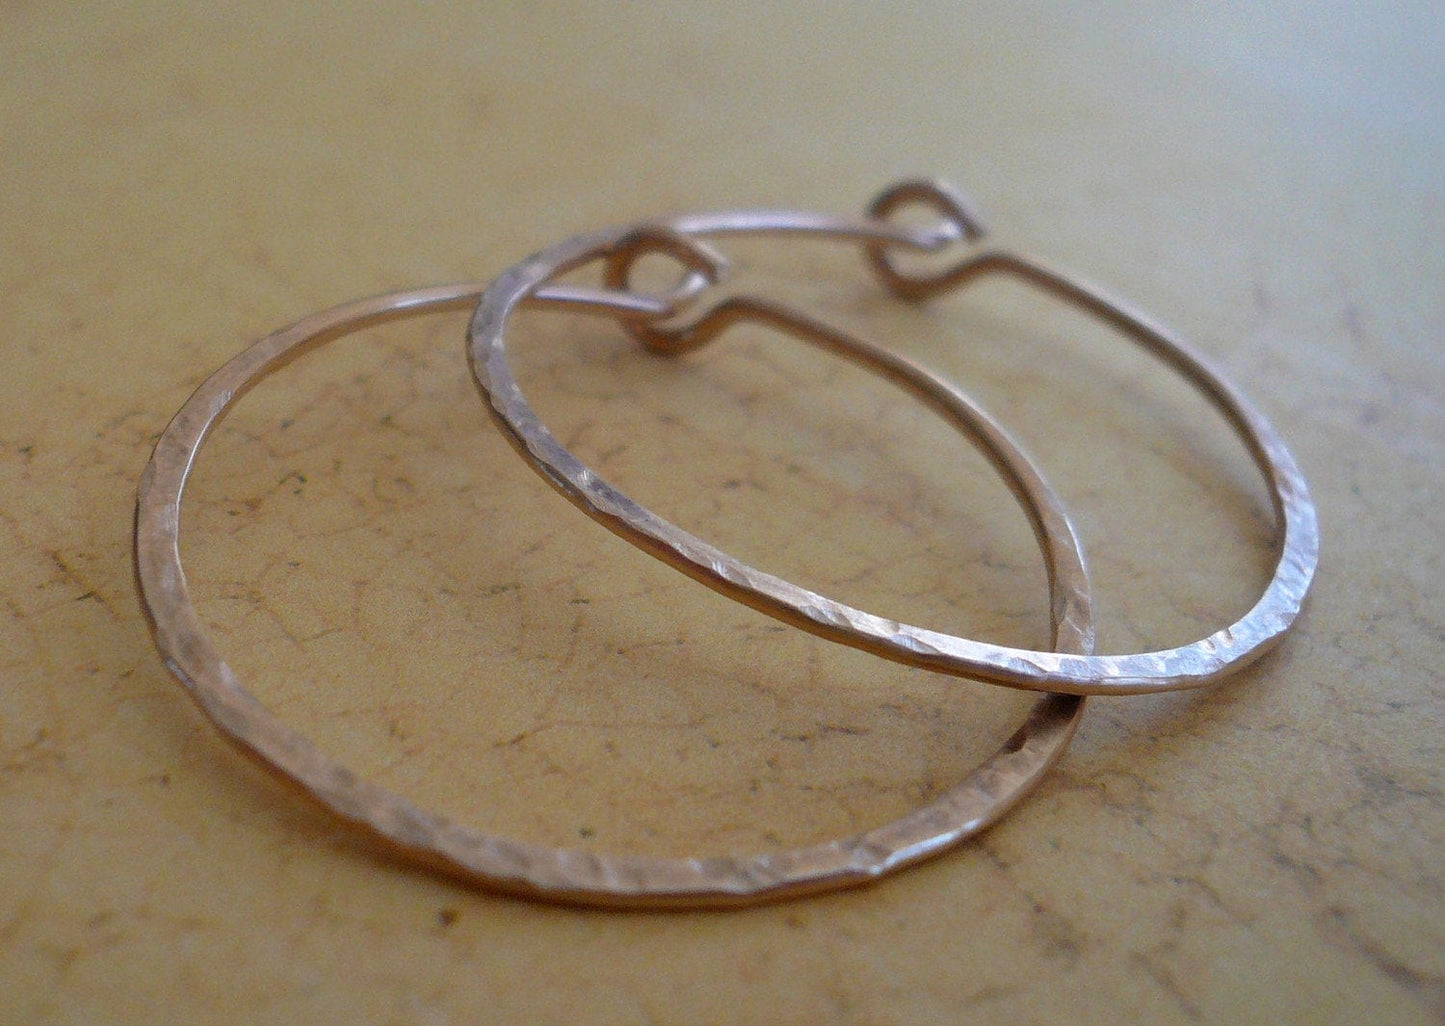 Mangly Hoops in Gold - Choice of 6 sizes. Handmade. Hammered. 14k goldfill hoops